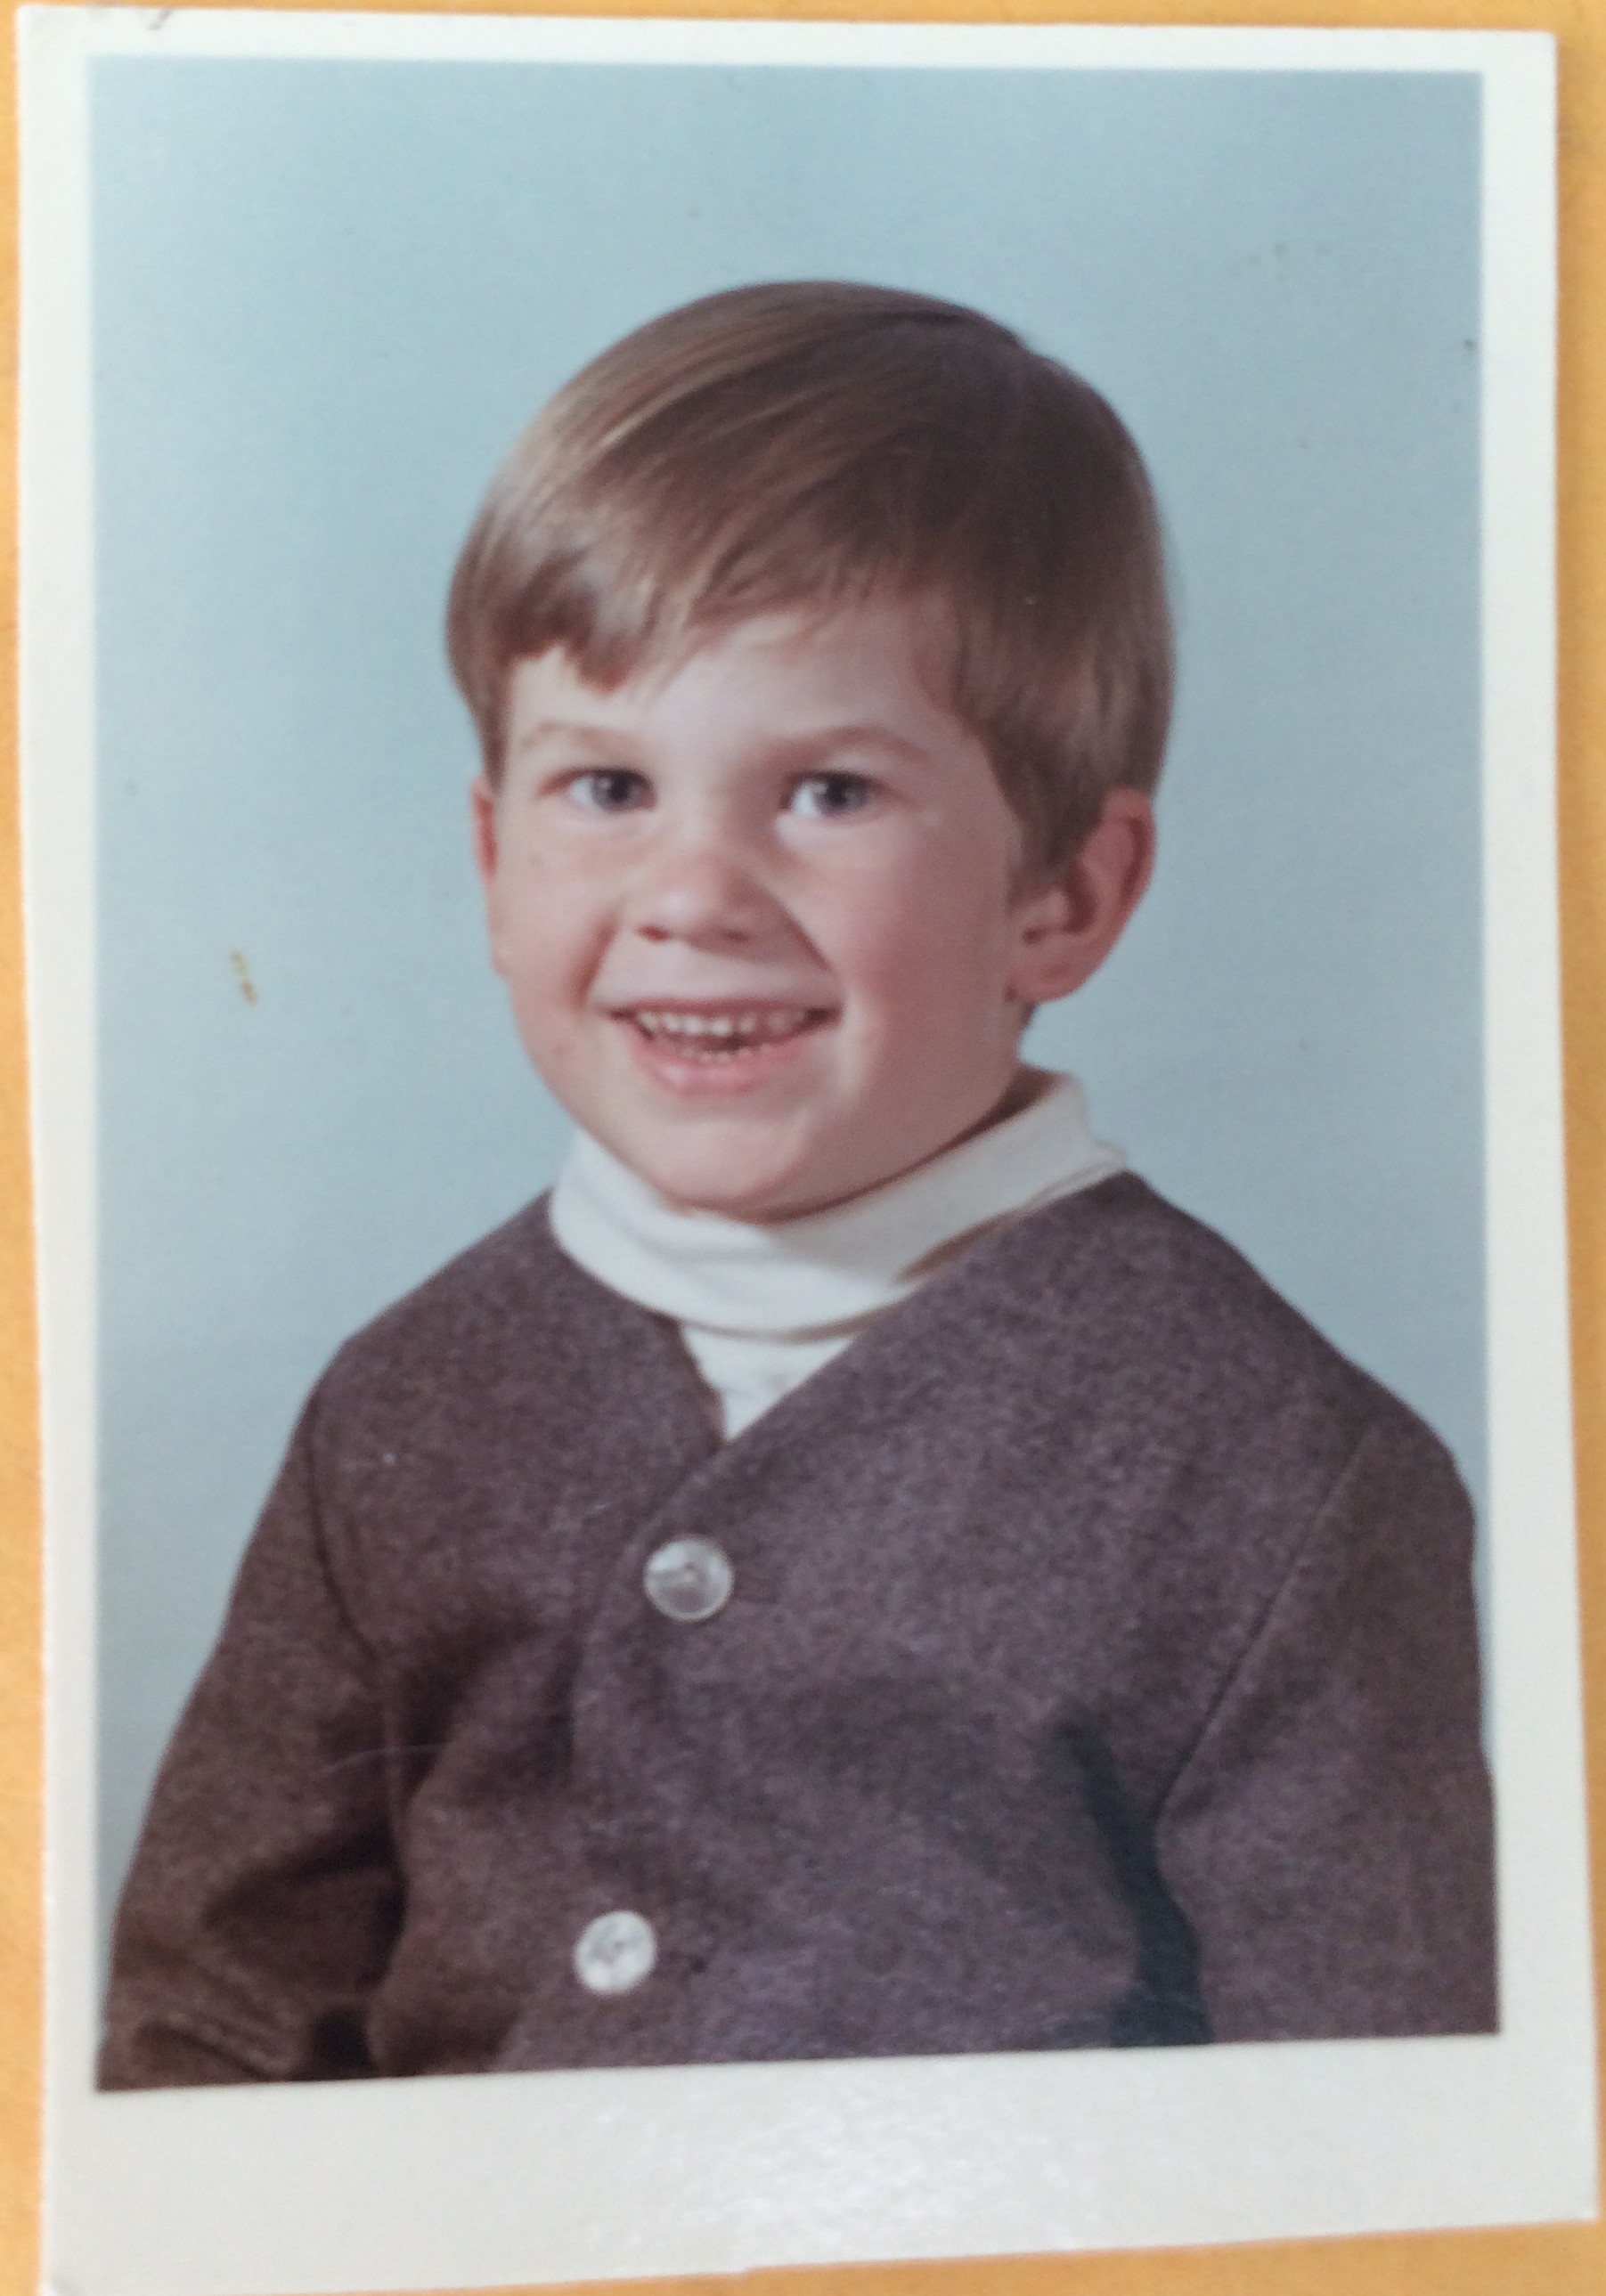 Young Justin in 1969